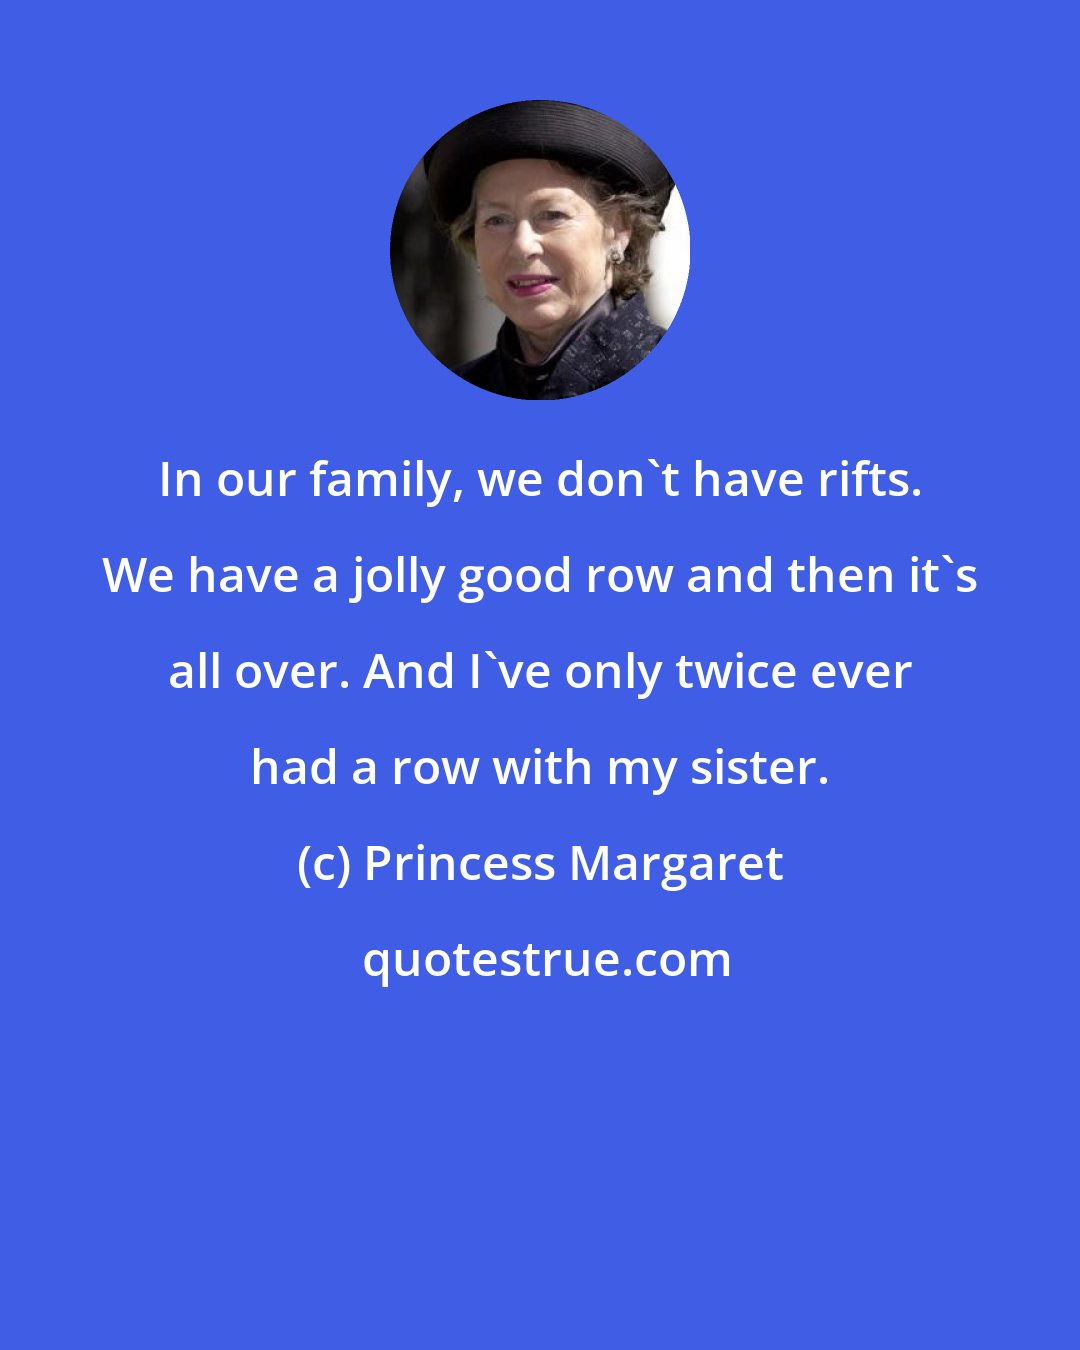 Princess Margaret: In our family, we don't have rifts. We have a jolly good row and then it's all over. And I've only twice ever had a row with my sister.